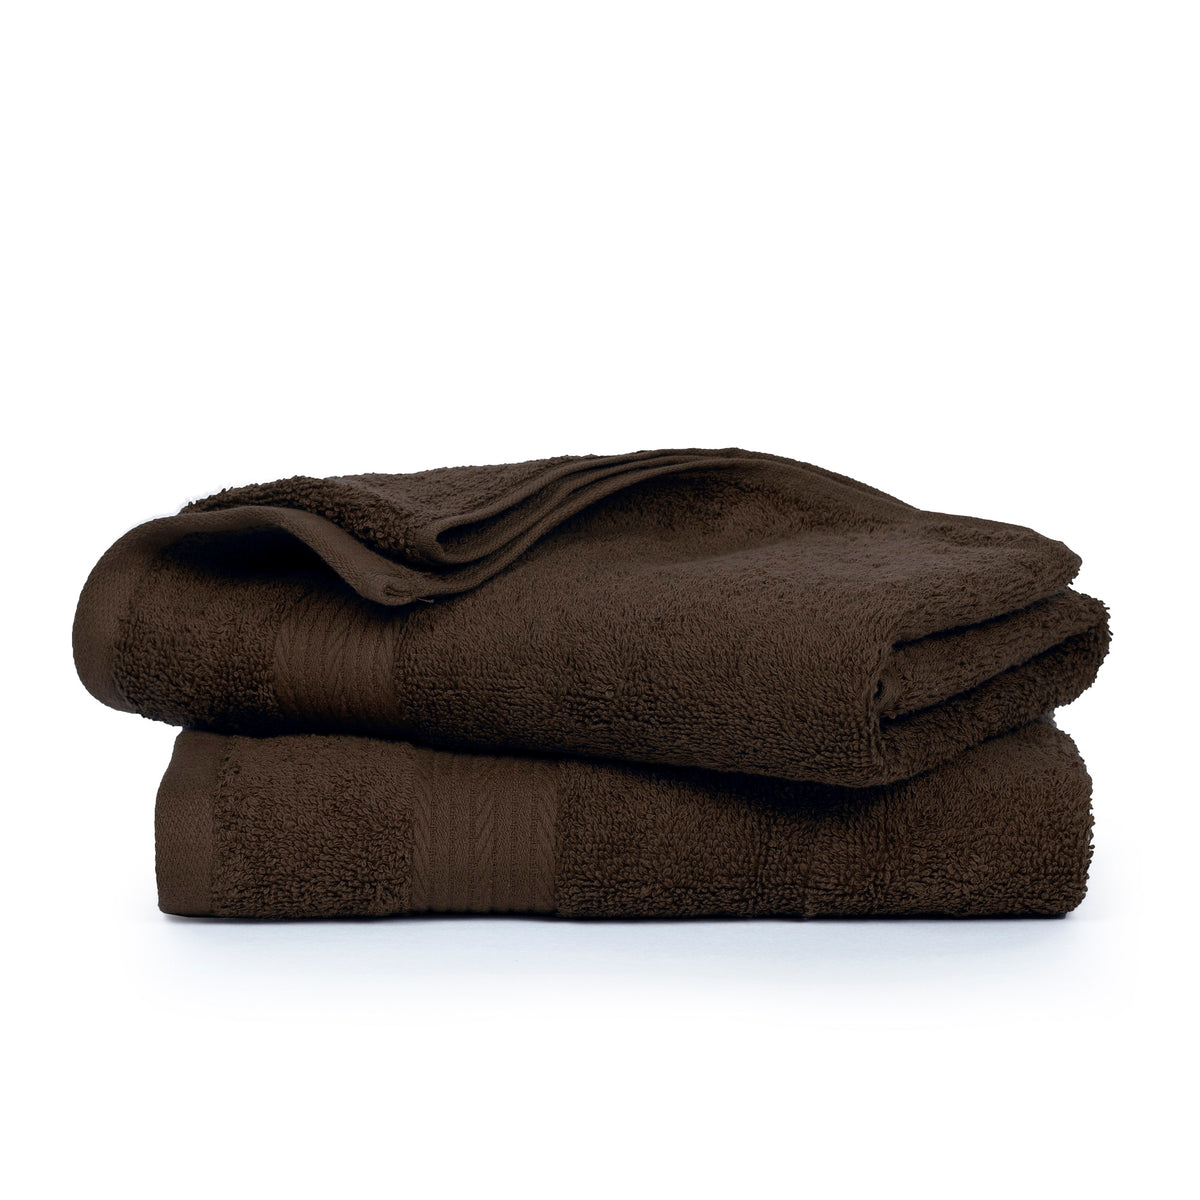 Hand Towel - Pack of 2